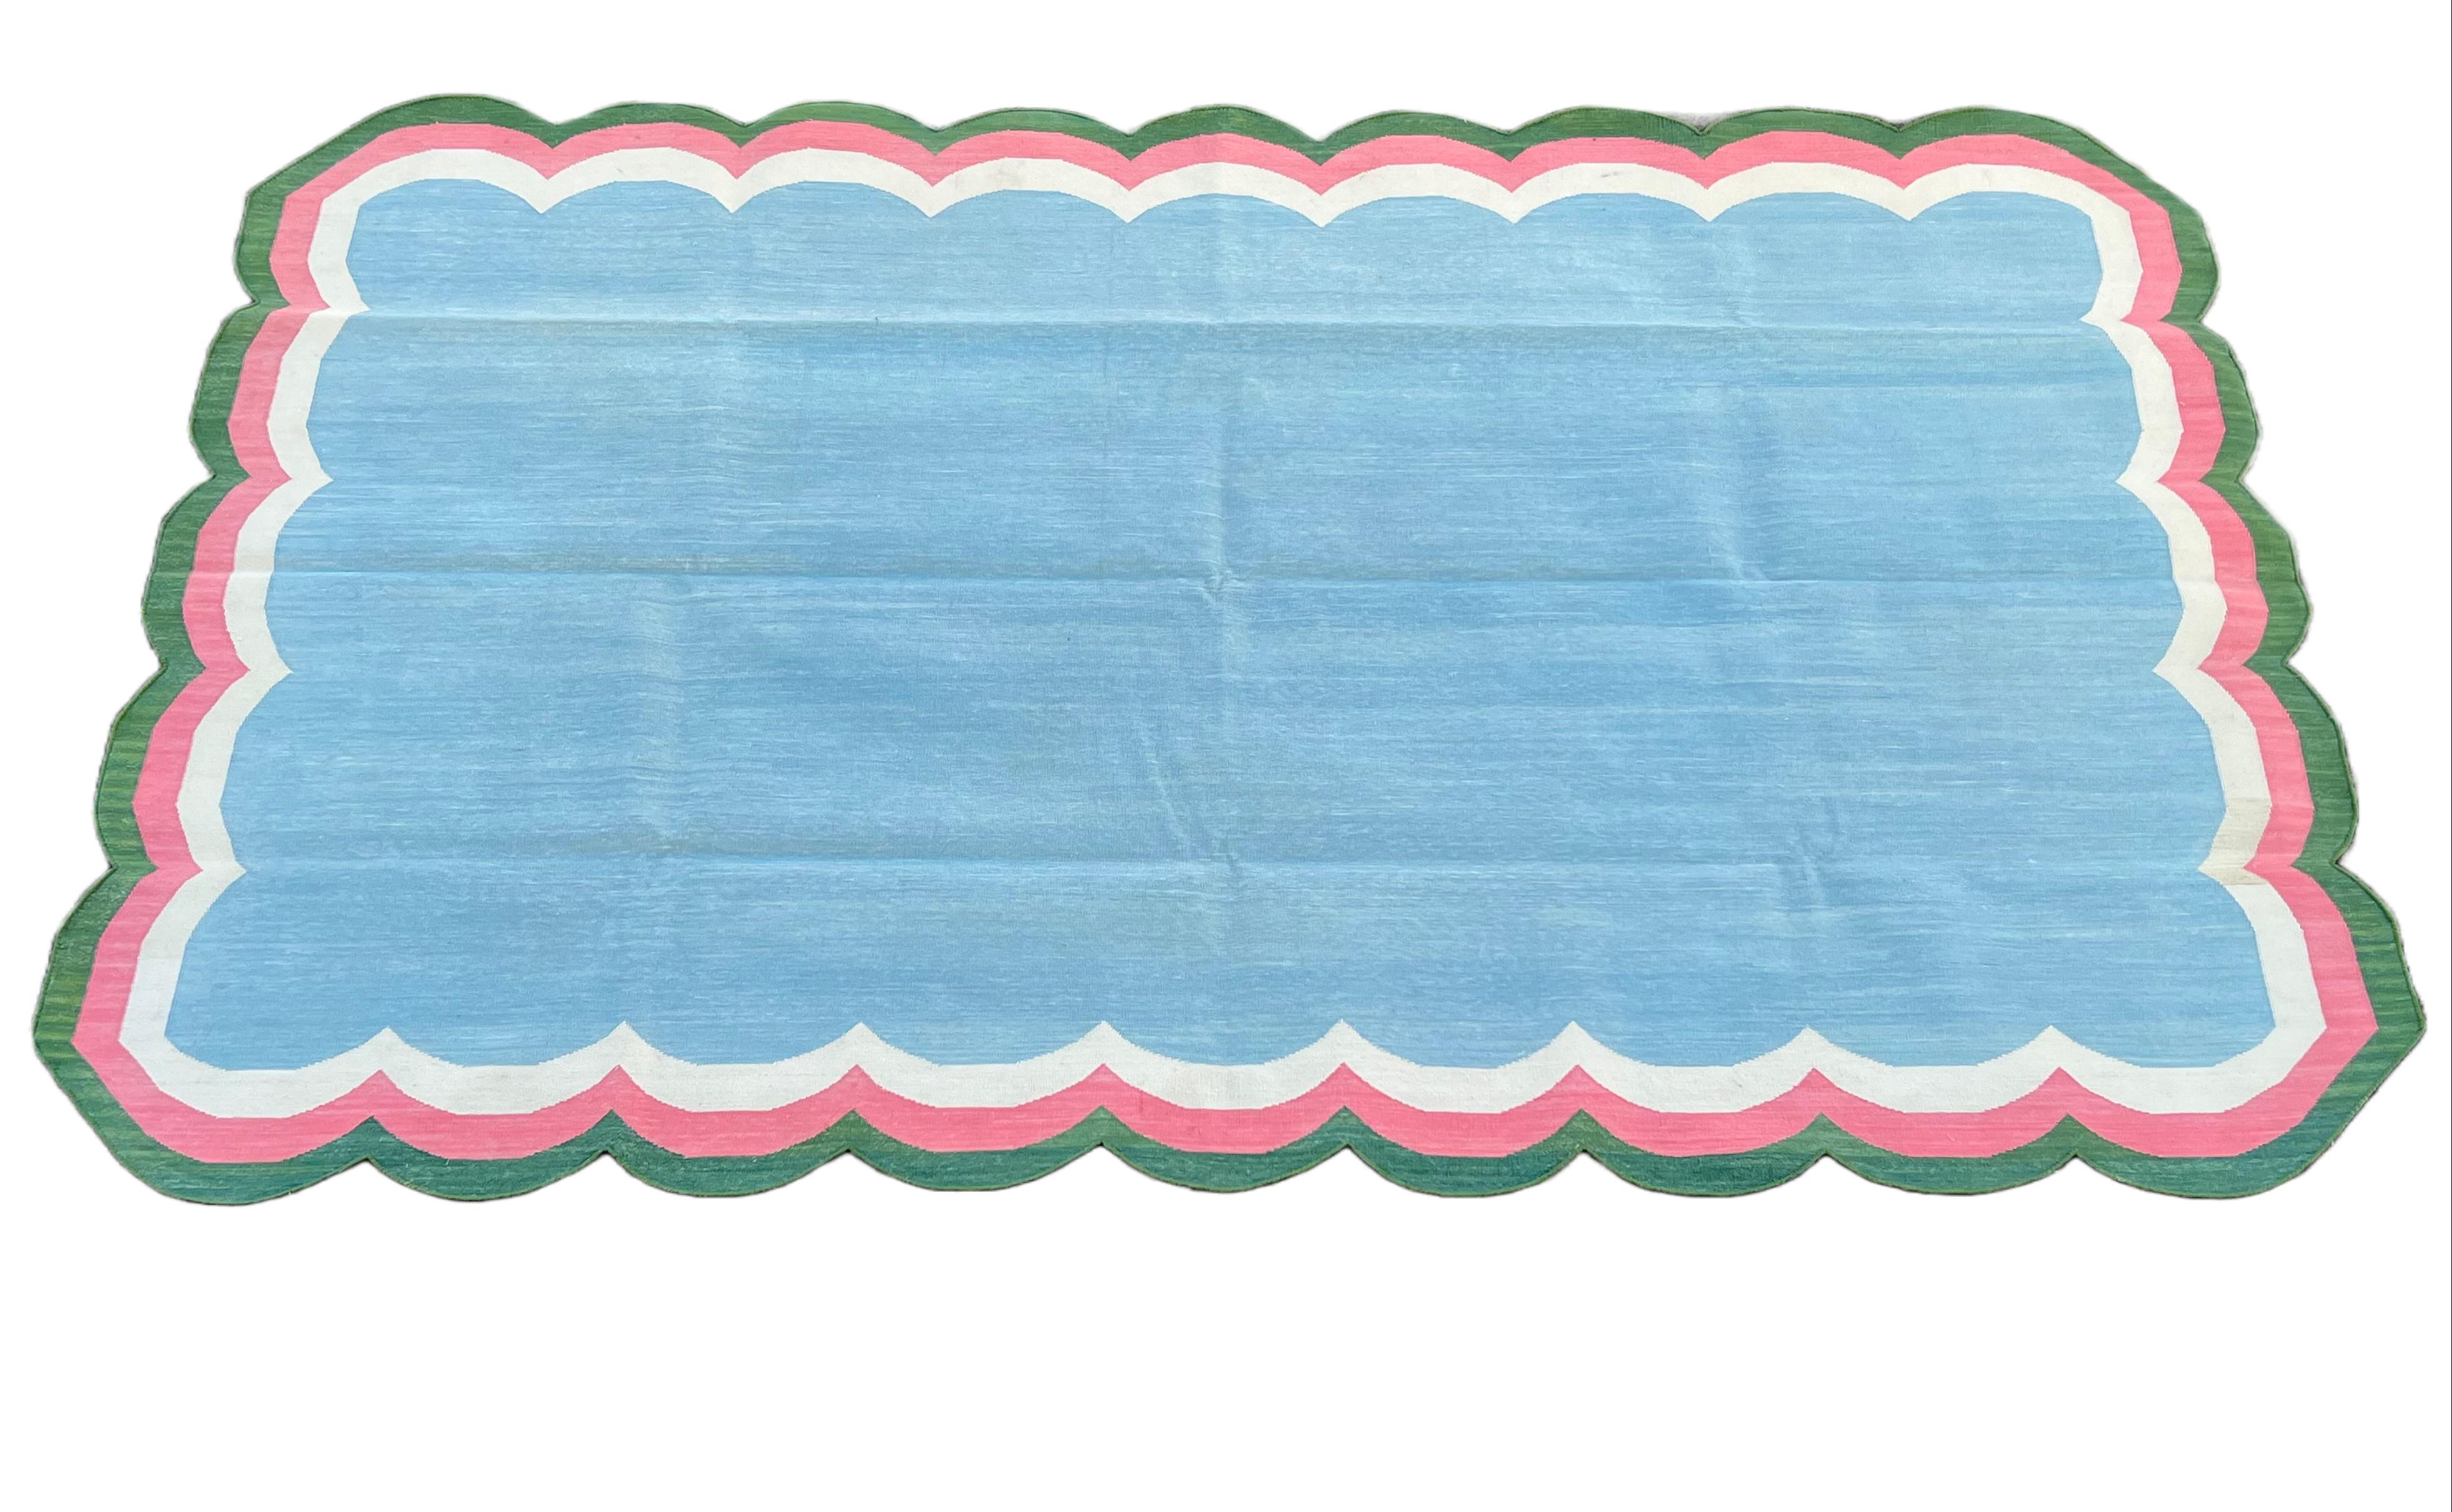 Handmade Cotton Area Flat Weave Rug, Blue, Pink, Green Scalloped Indian Dhurrie For Sale 6